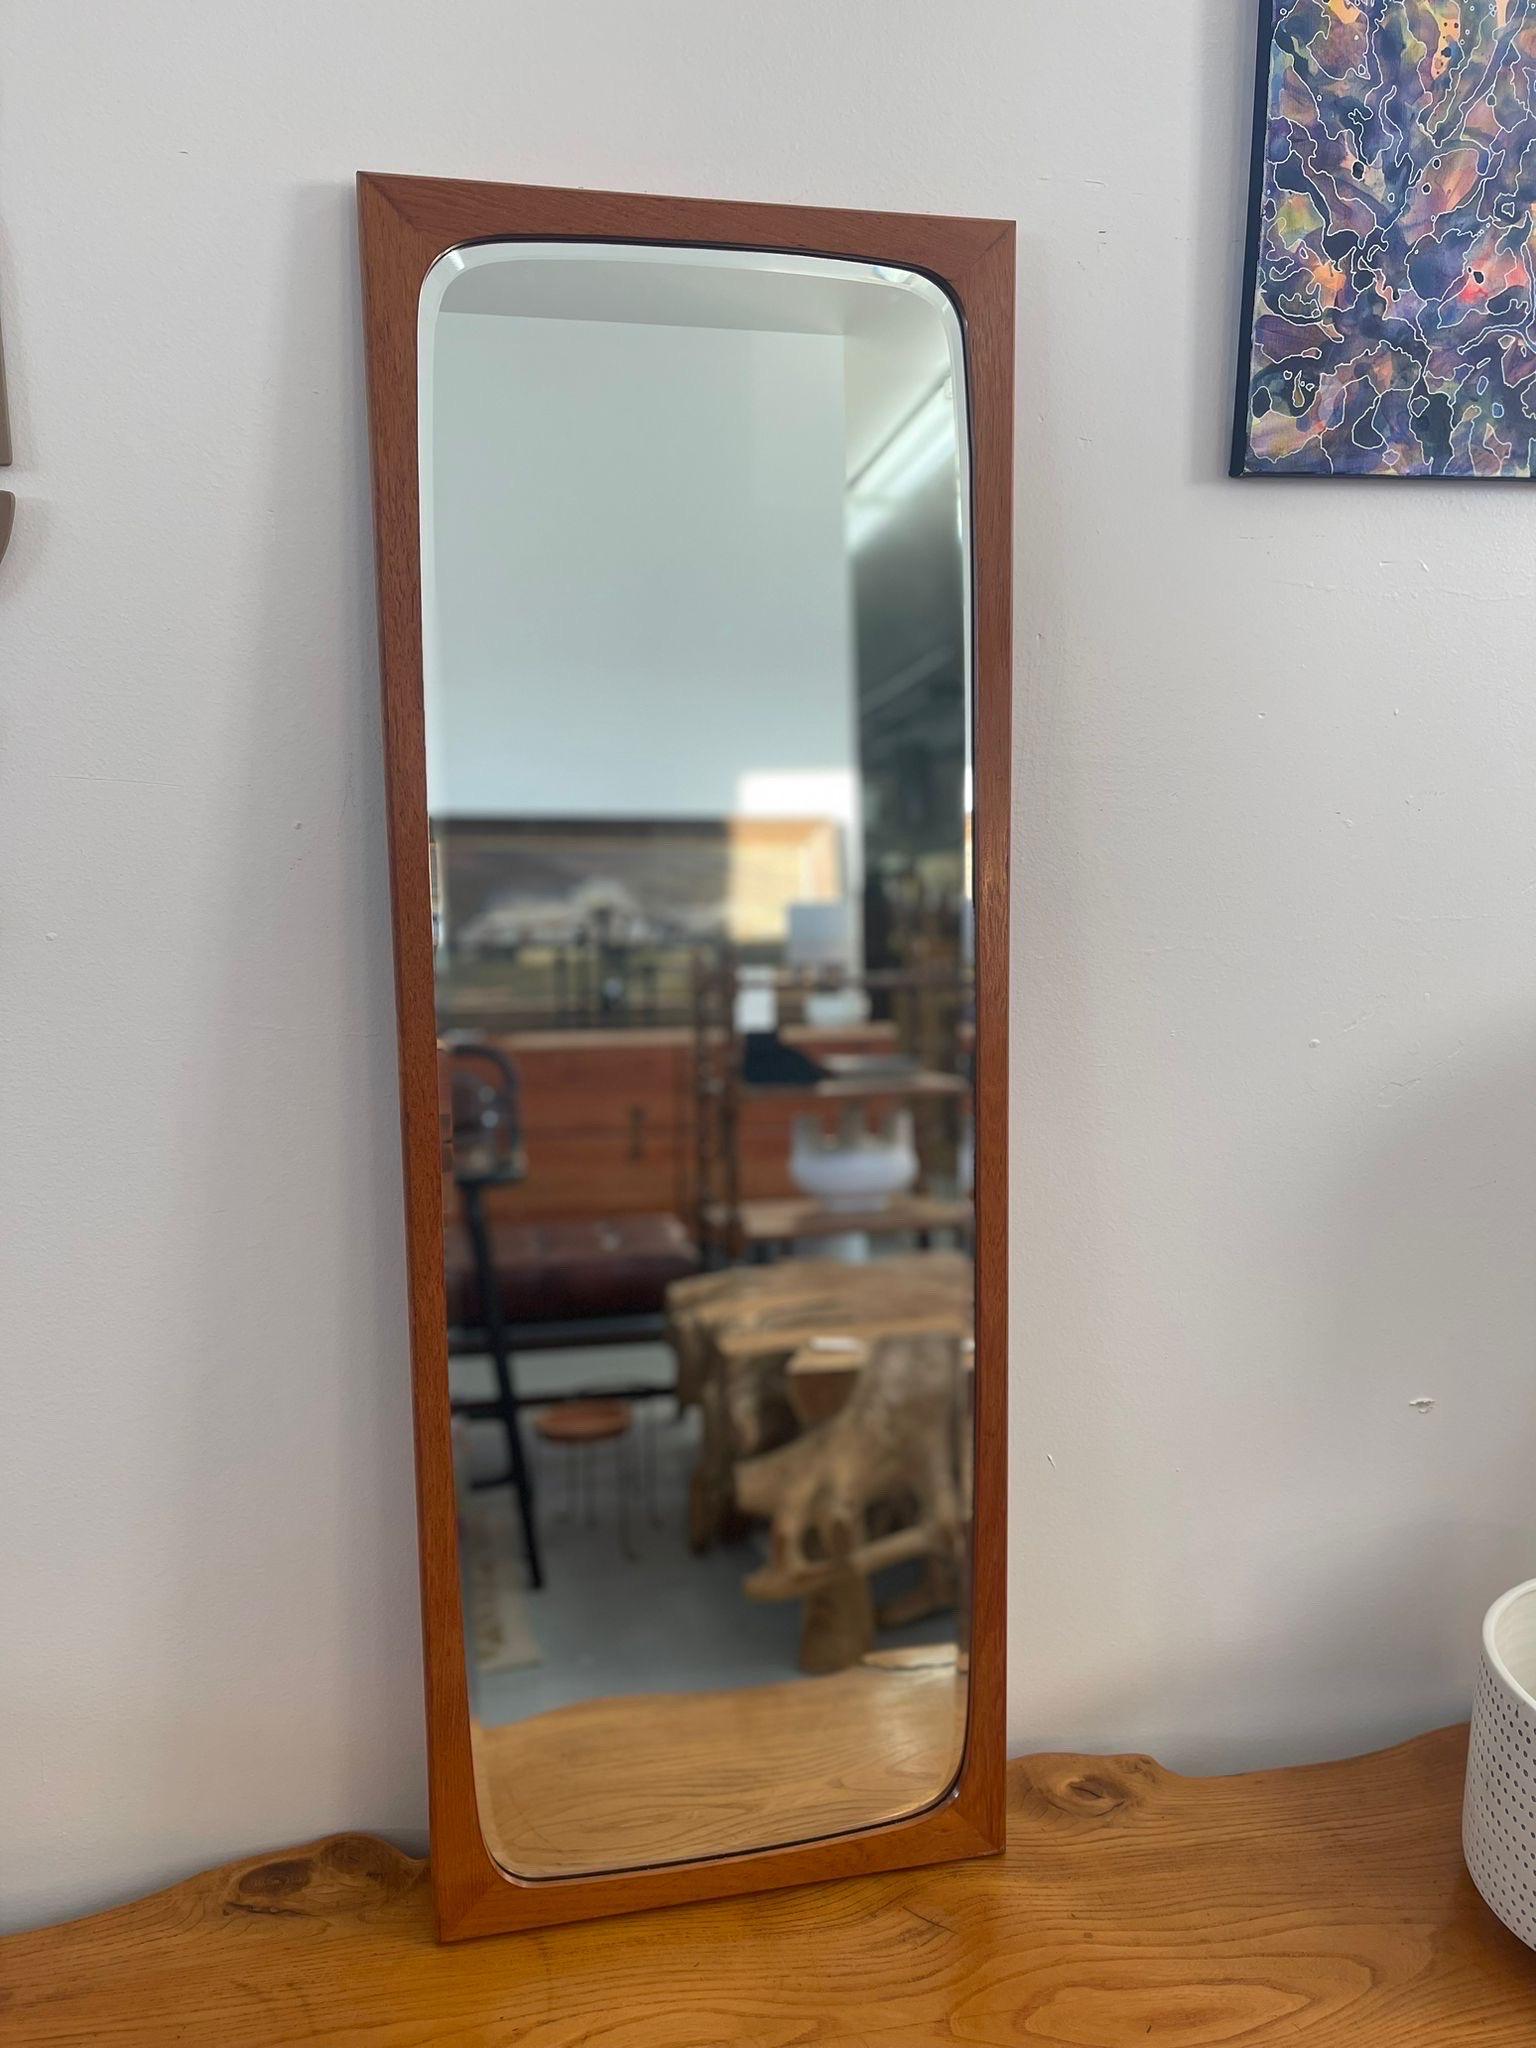 Possibly Teak Framing. Mirror has Rounded Mid Century Modern Style Corners. Beveled Mirror. Vintage Condition Consistent with Age as Pictured.

Dimensions. 16 1/2 W ; 1 D ; 46 H